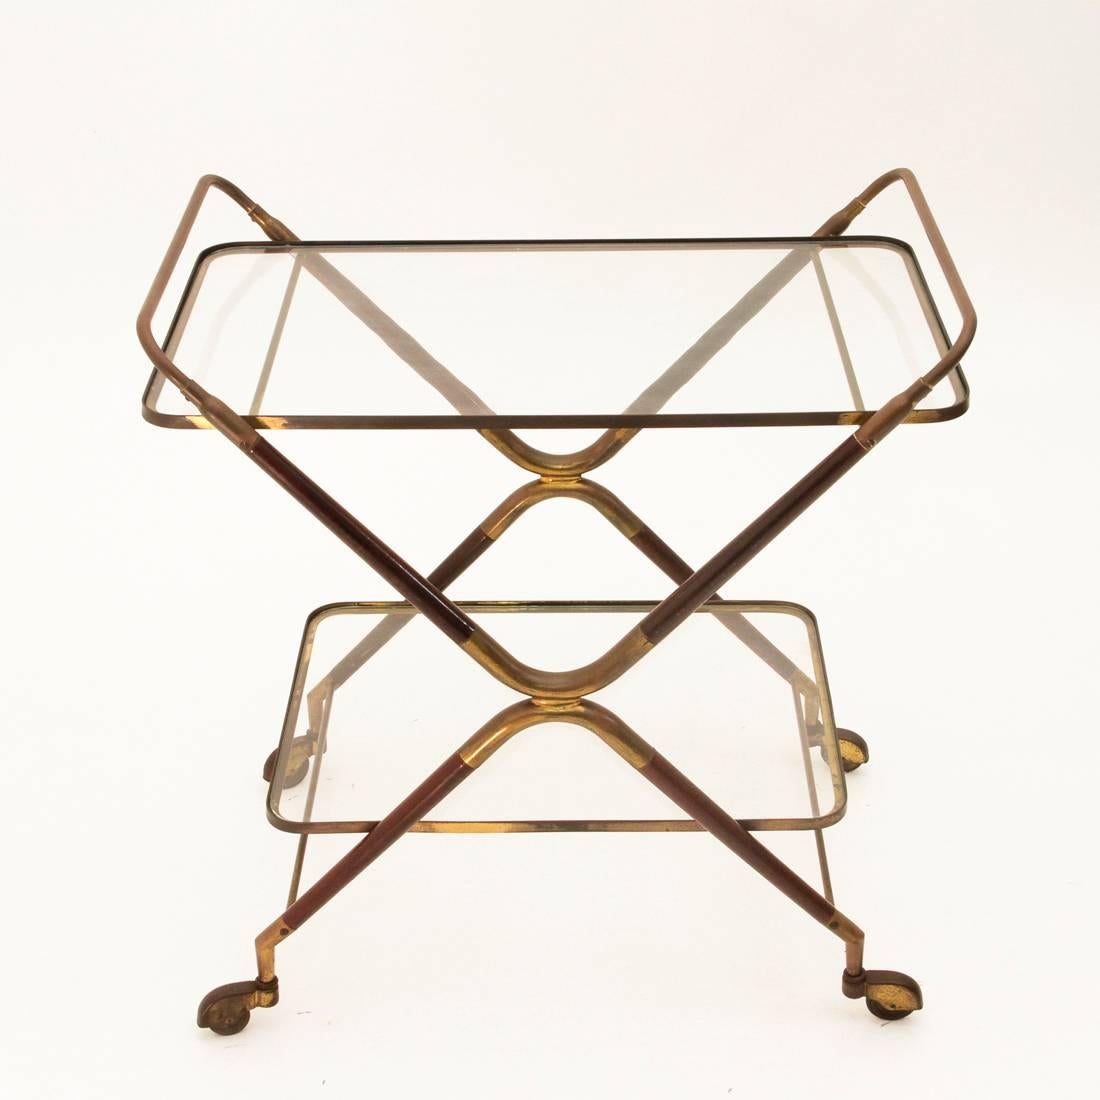 A lunch trolley designed by Cesare Lacca during the 1950s, featuring a double C-structure in inverted brass and lacquered wood, two shelves with an edge in brass, a glass top, brass details and rubber wheels.